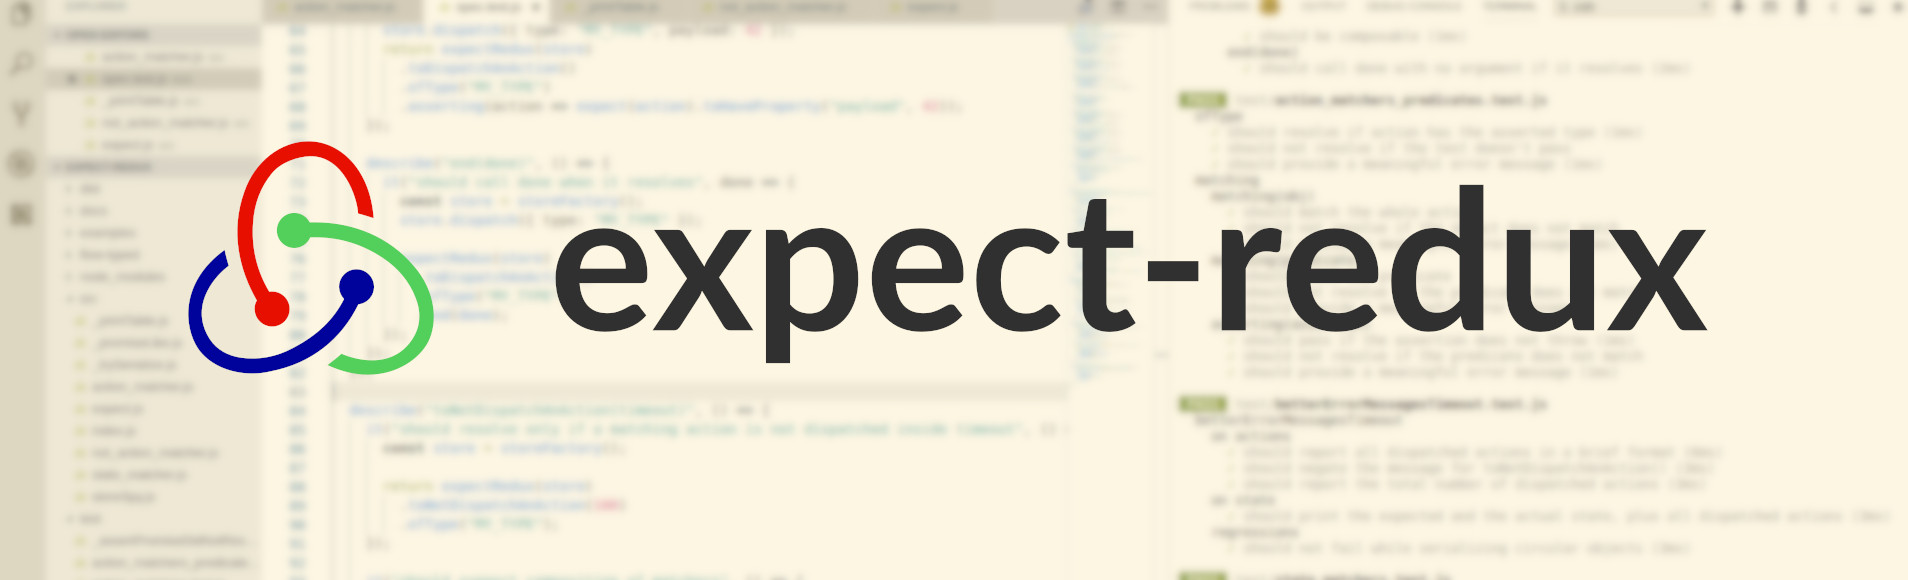 The logo of expect-redux